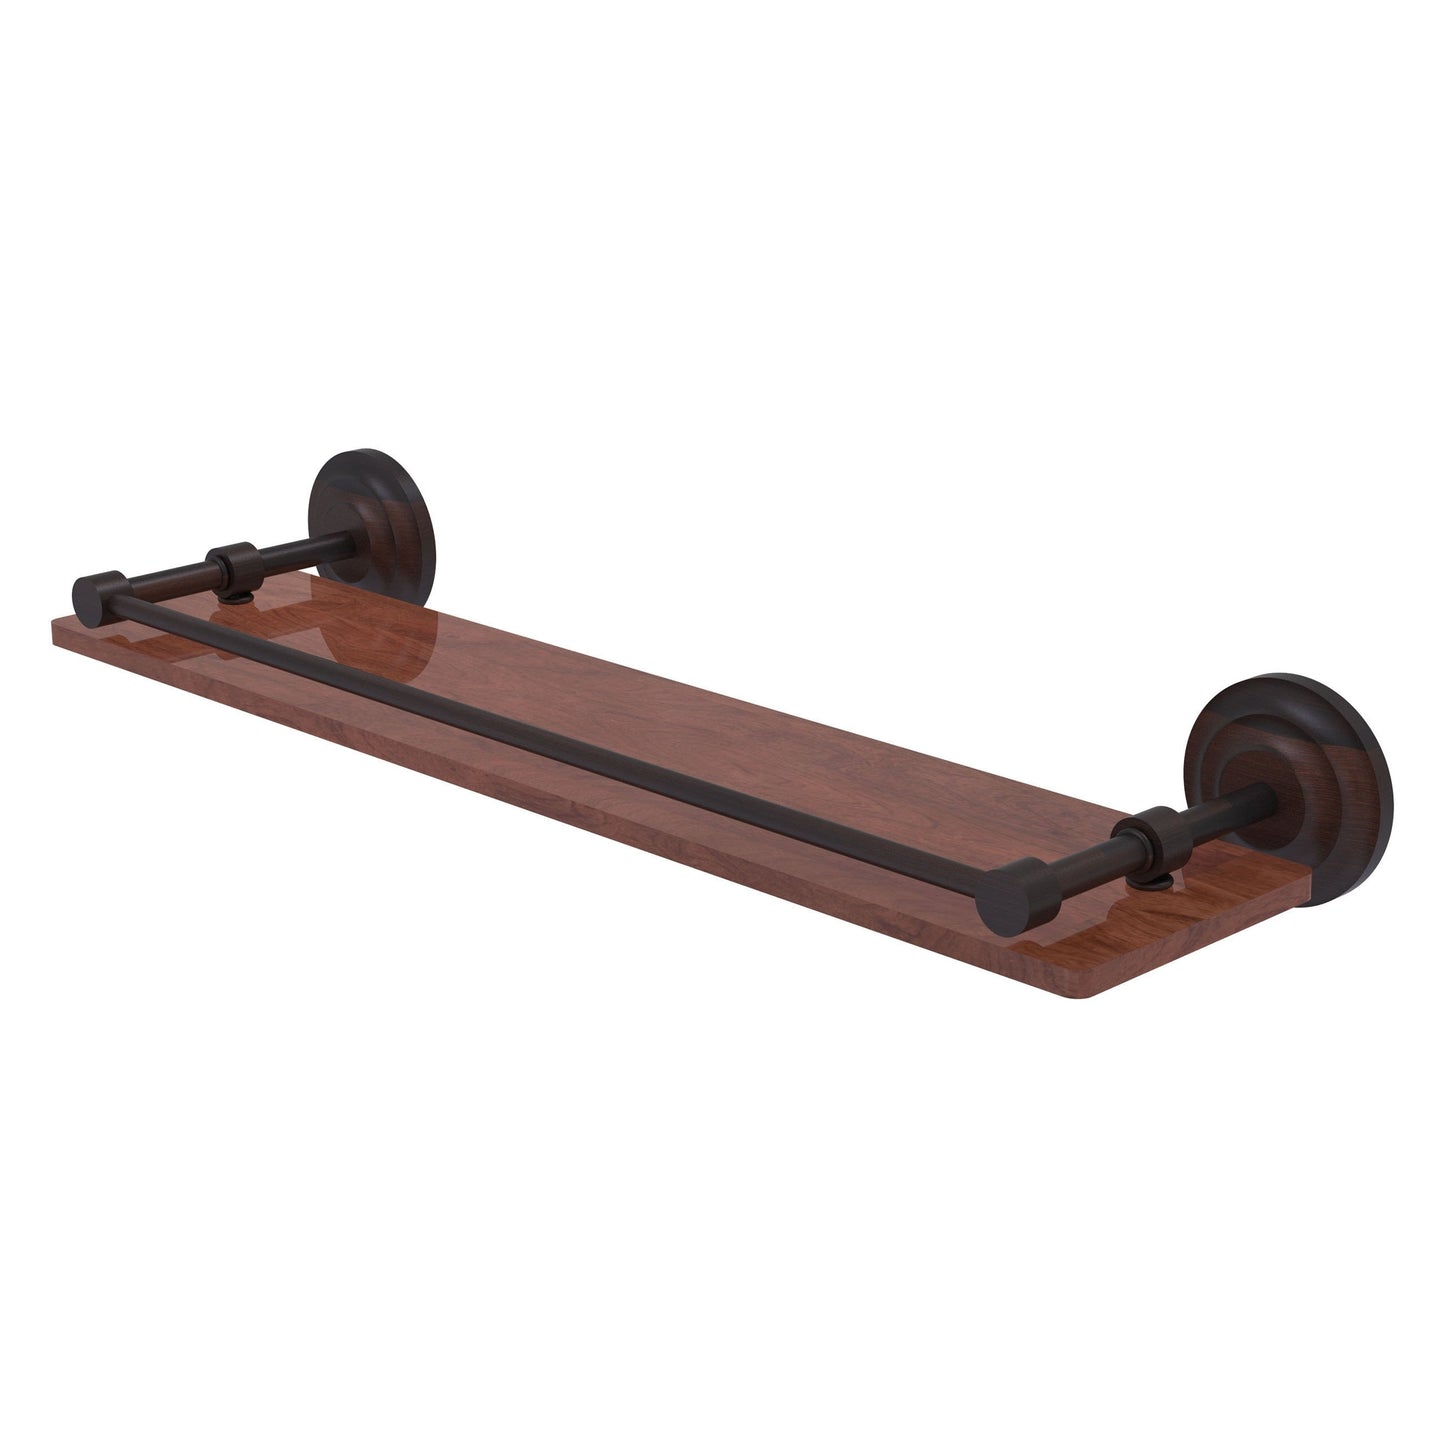 Allied Brass Que New 22" x 5" Venetian Bronze Solid Brass 22-Inch Solid IPE Ironwood Shelf With Gallery Rail